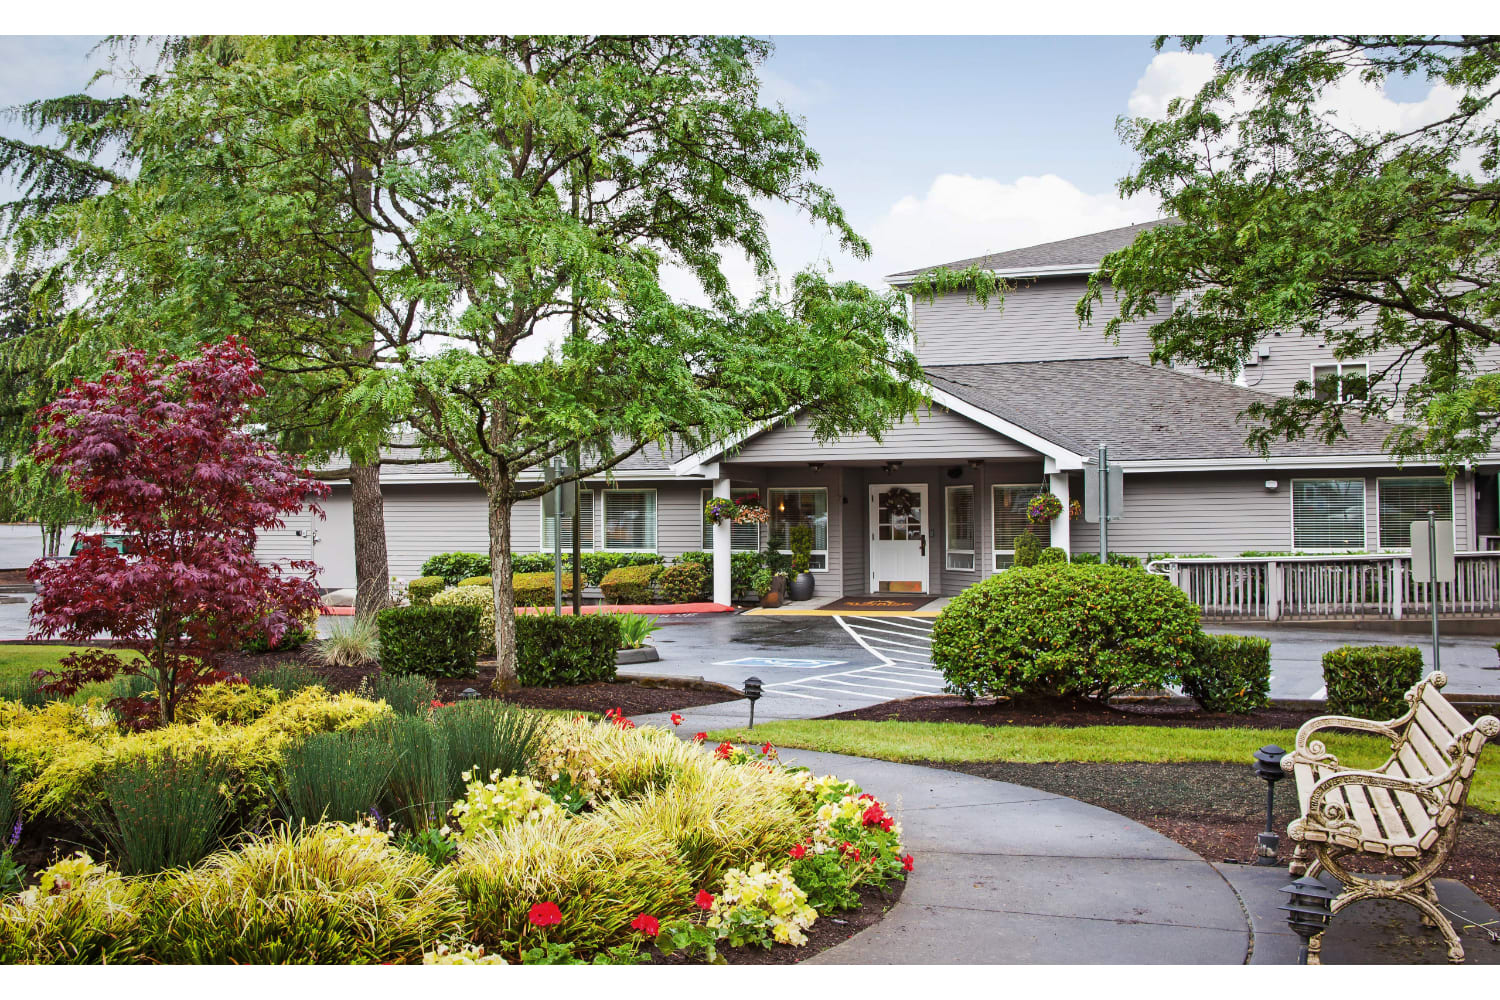 Cogir of Bothell community exterior